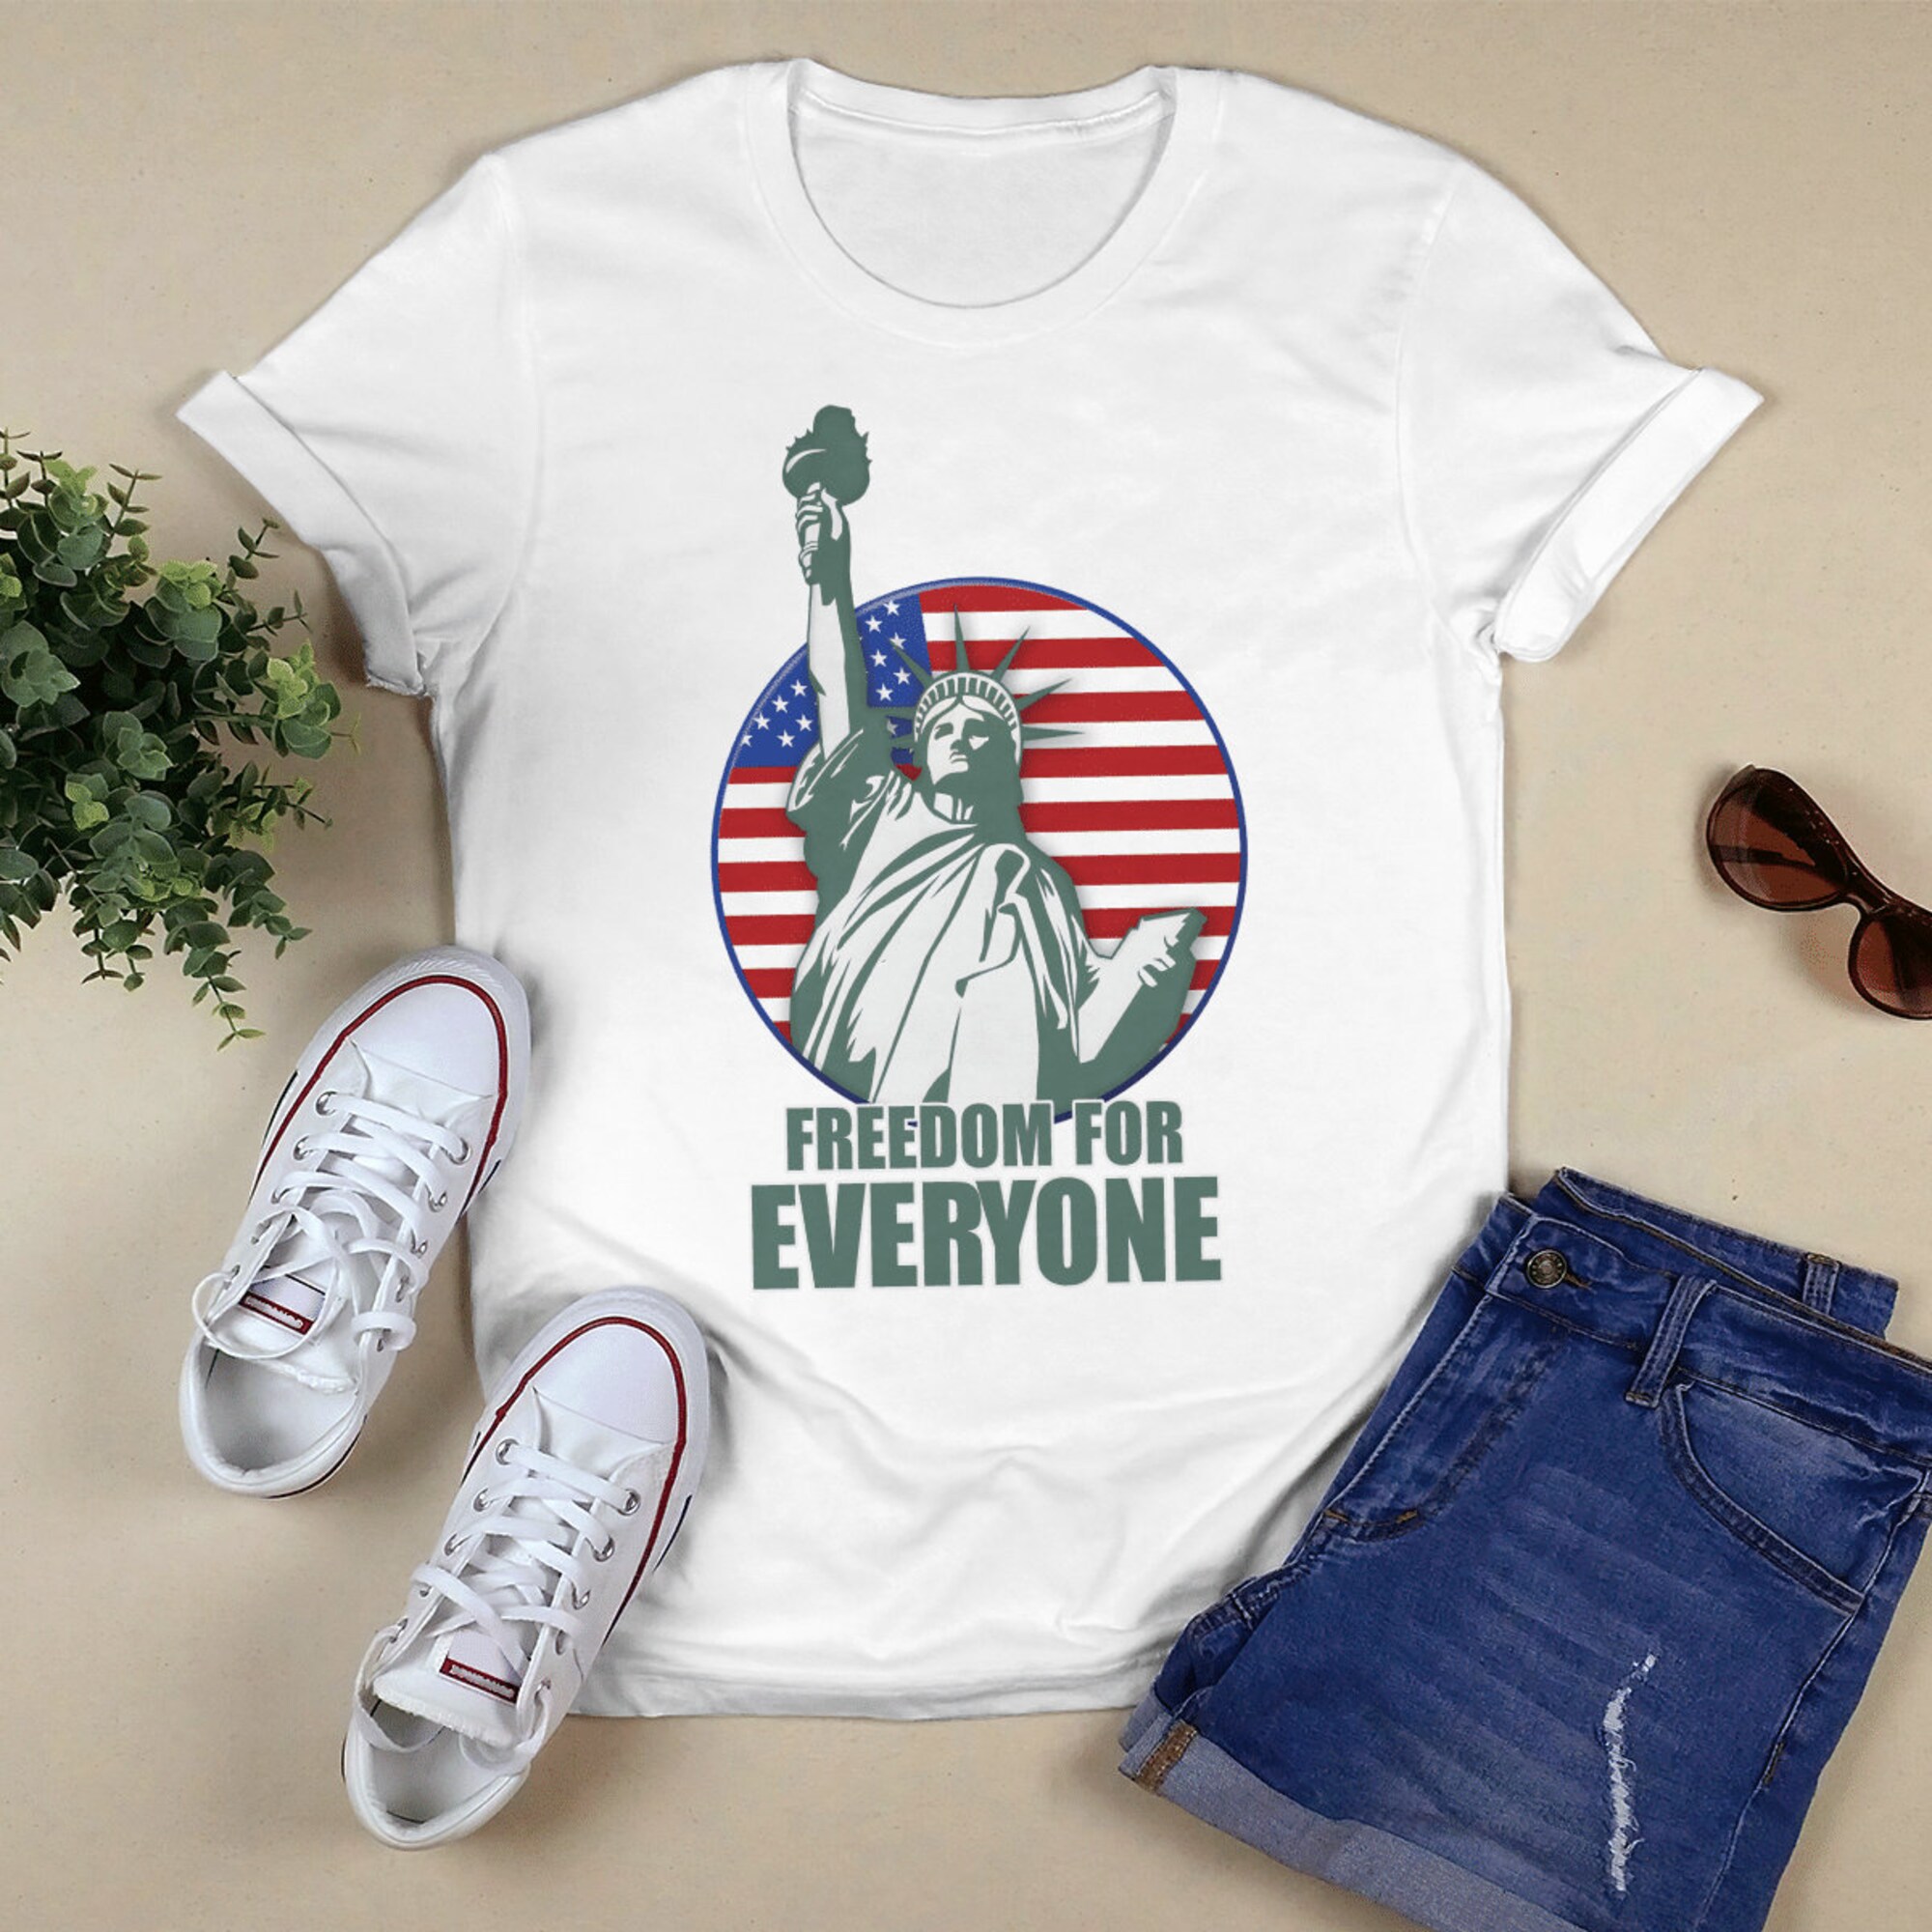 Discover Freedom for Everyone Shirt For 4th Of July Independence Day